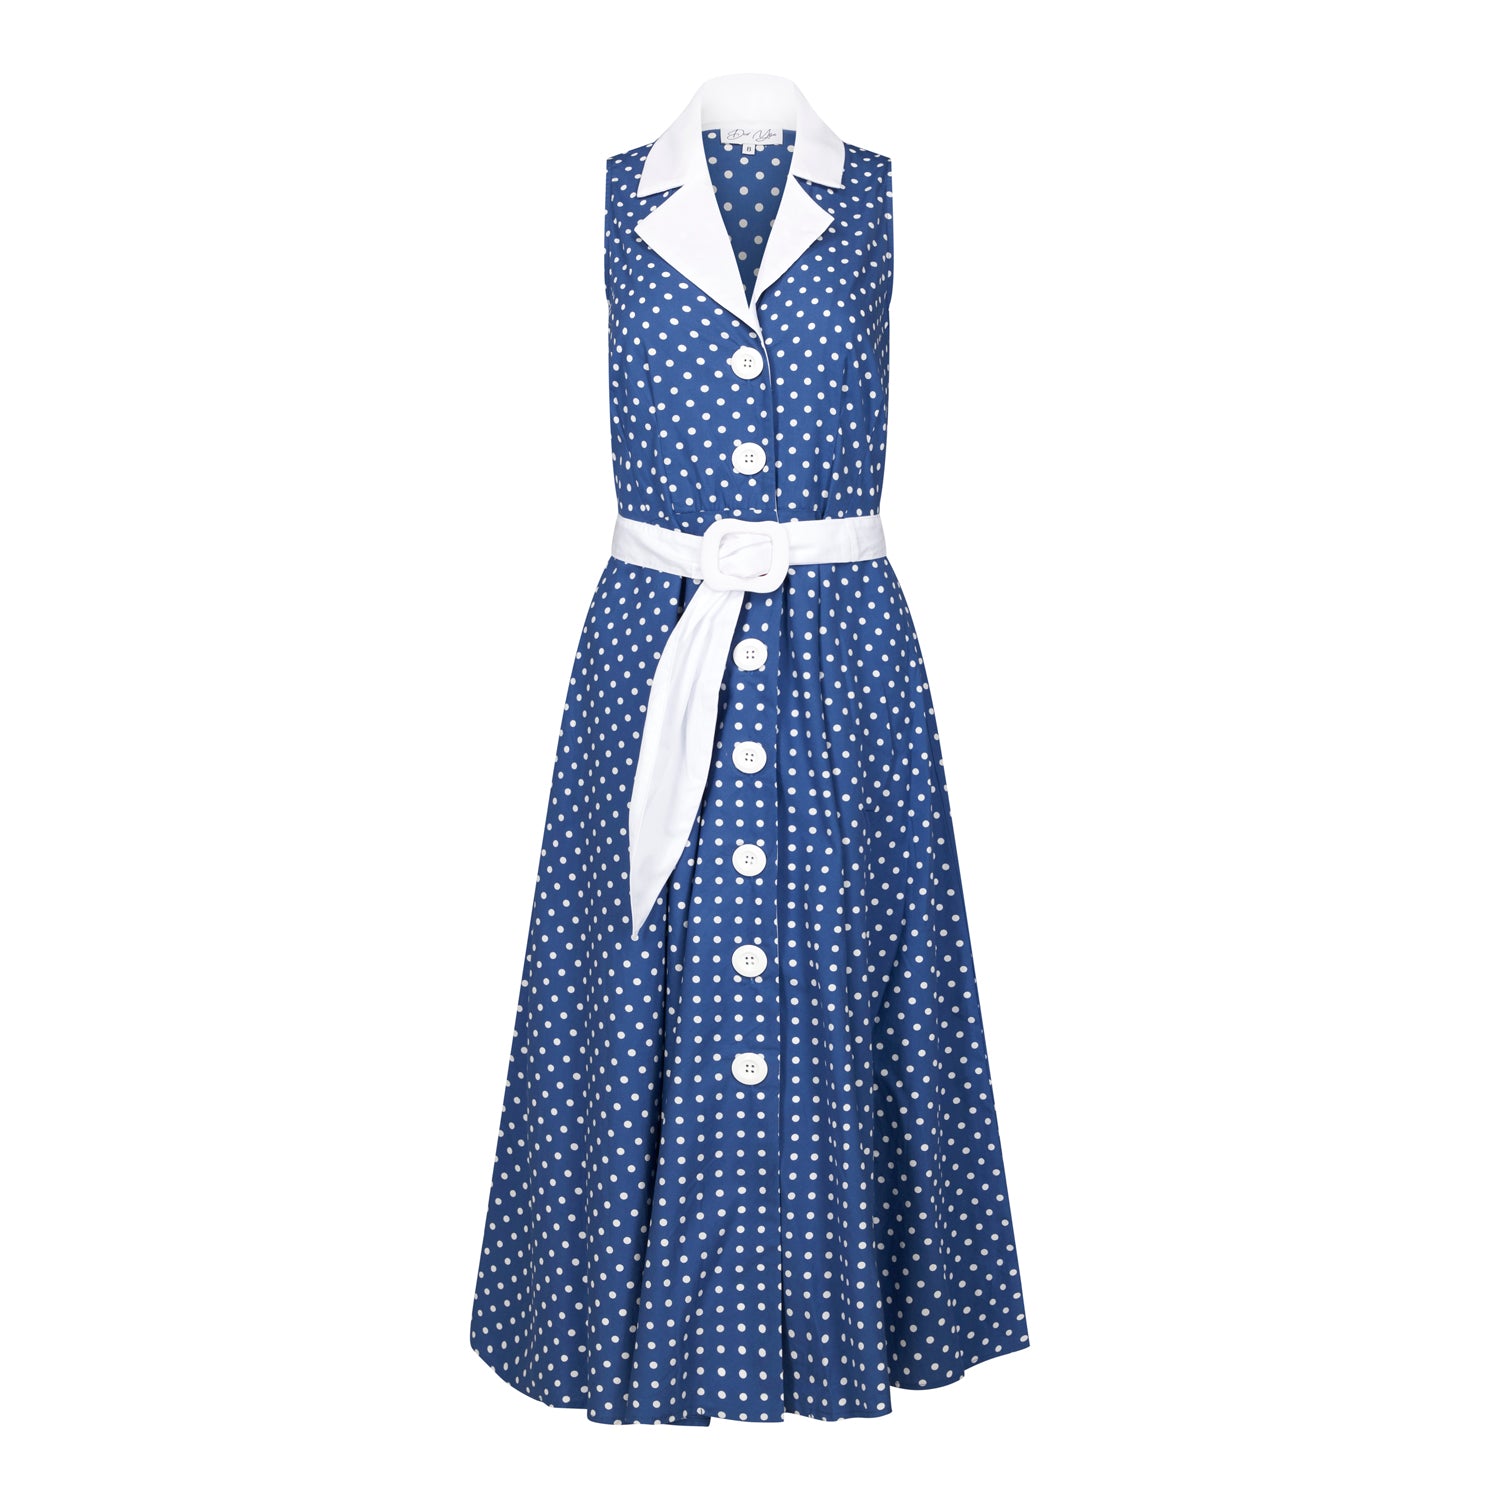 Ghost image, front view of blue and white fit and flare polka dot midi dress.  Collar and belt is contrast white. 